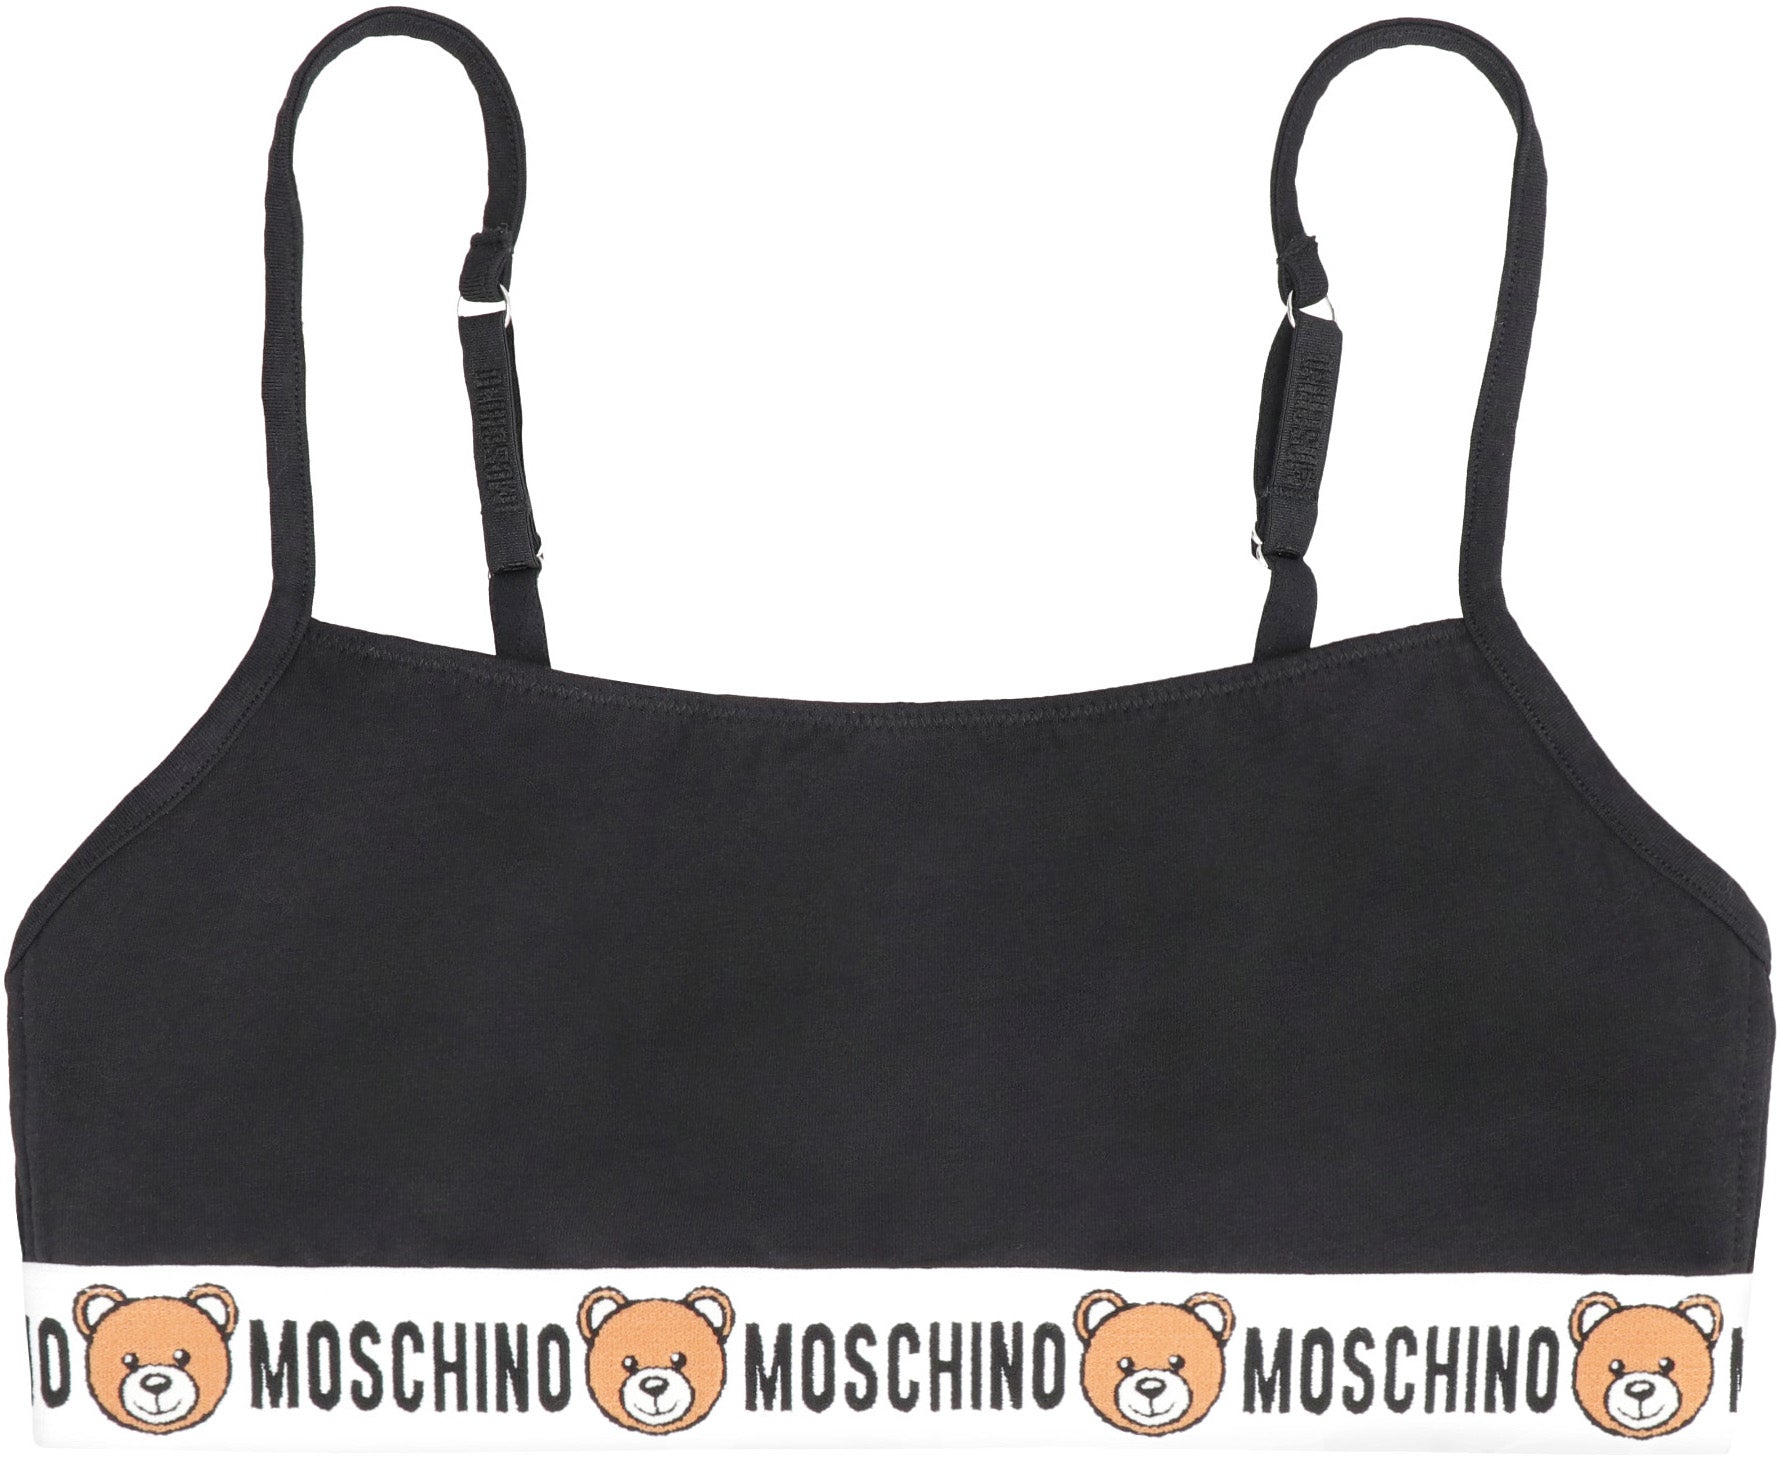 Moschino Bra With Logo in Red